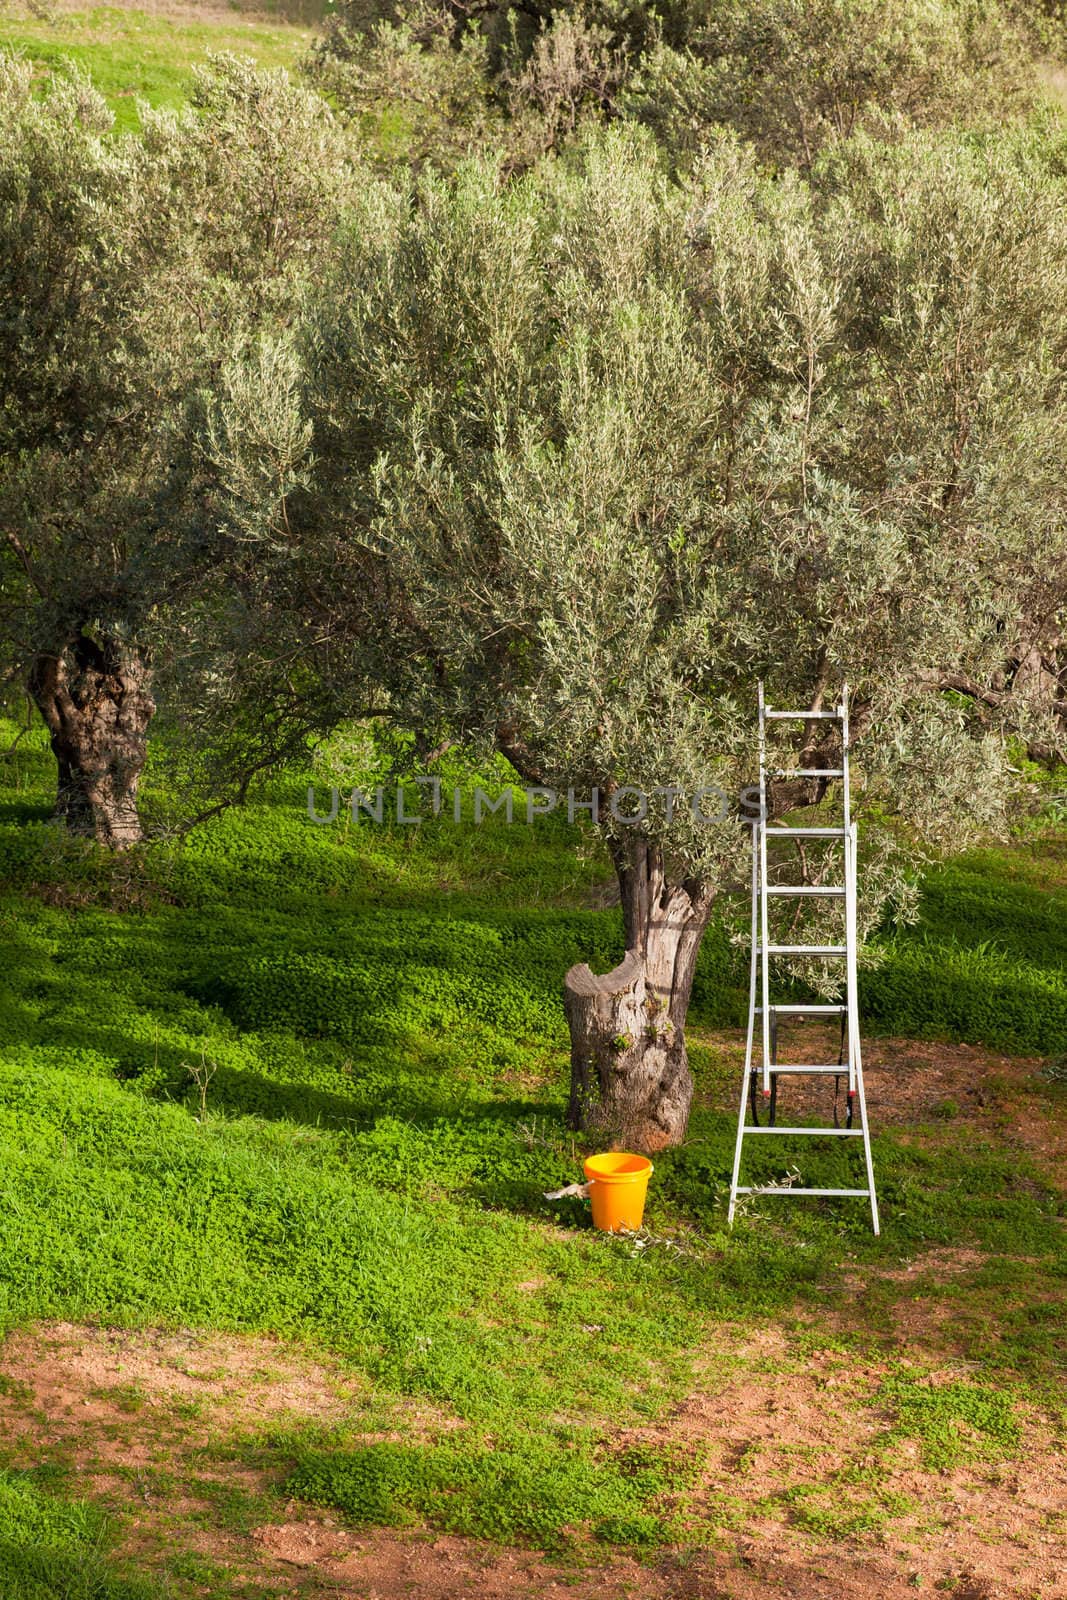 Olive tree garden being harvested: metal ladder leaning in olive tree (Olea europaea) with bucket at the bottom.